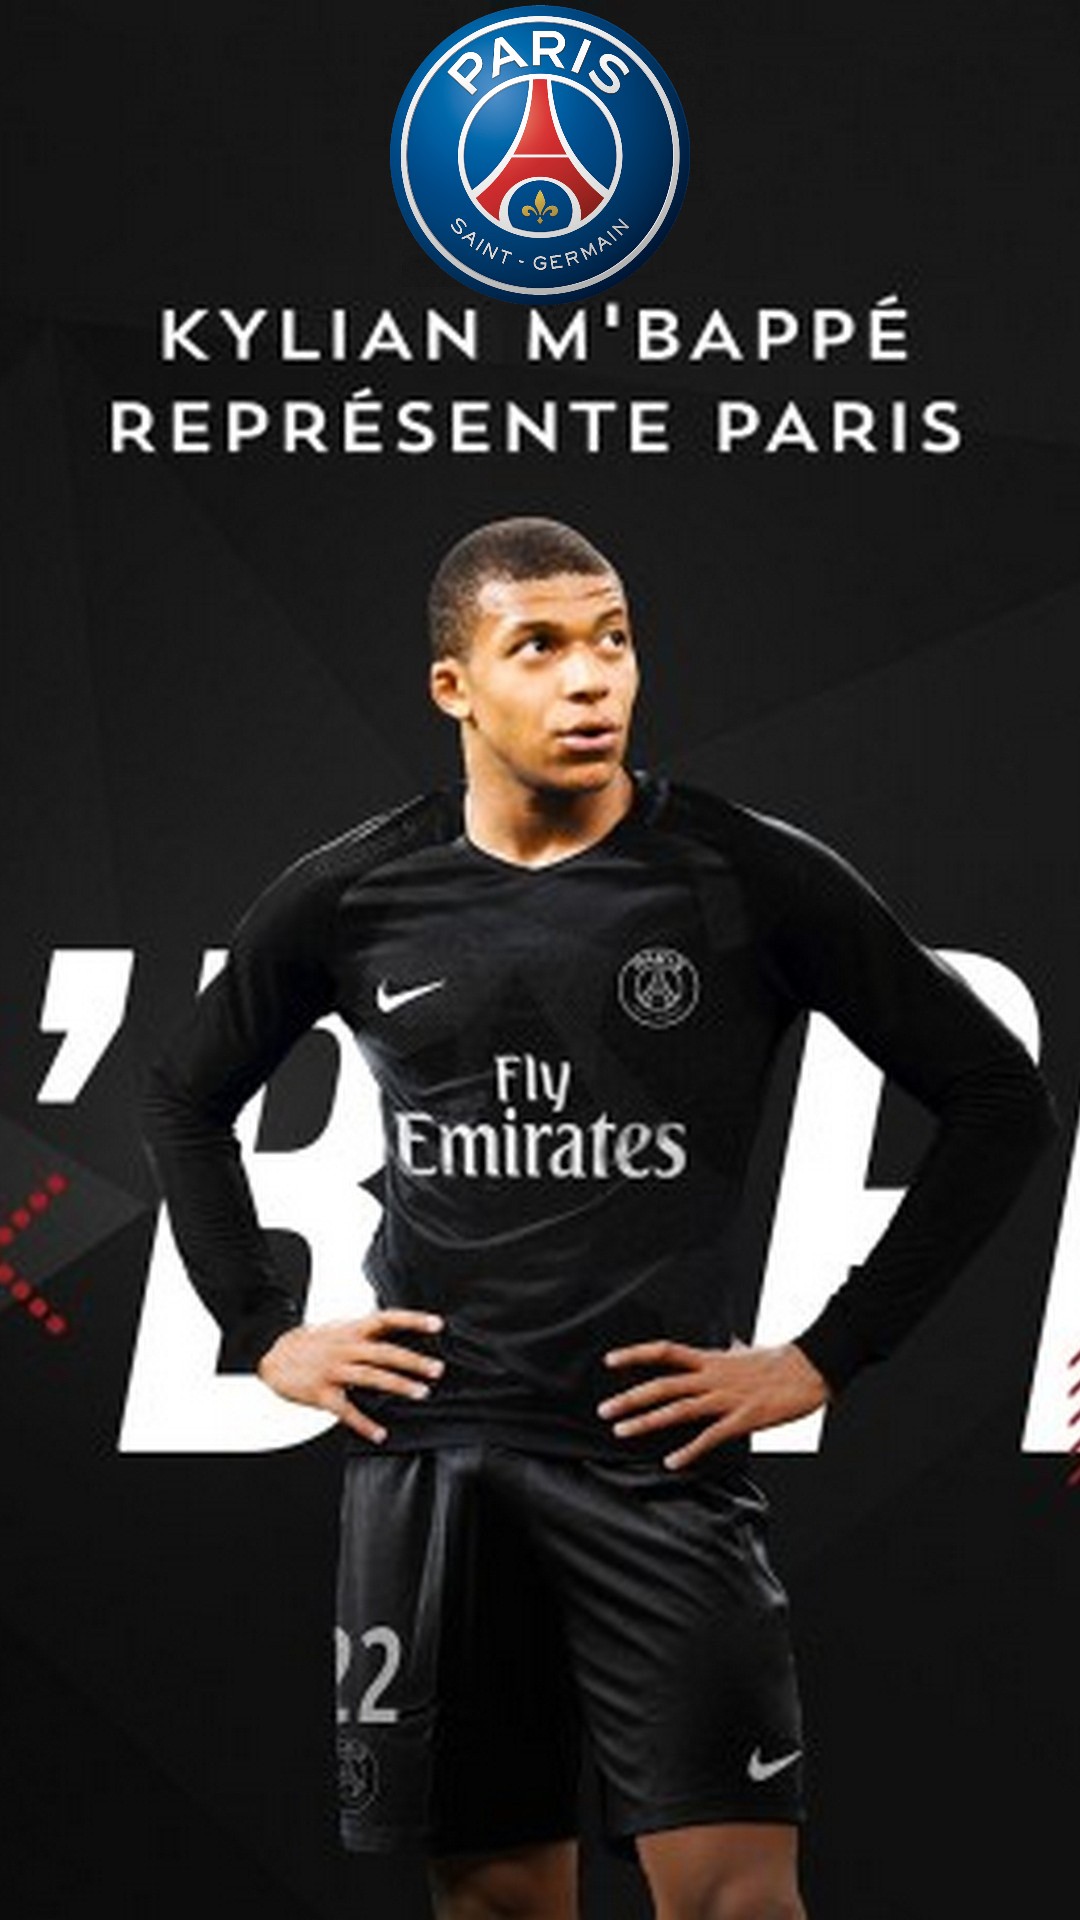 Kylian Mbappe PSG iPhone X Wallpaper With Resolution 1080X1920 pixel. You can make this wallpaper for your Mac or Windows Desktop Background, iPhone, Android or Tablet and another Smartphone device for free